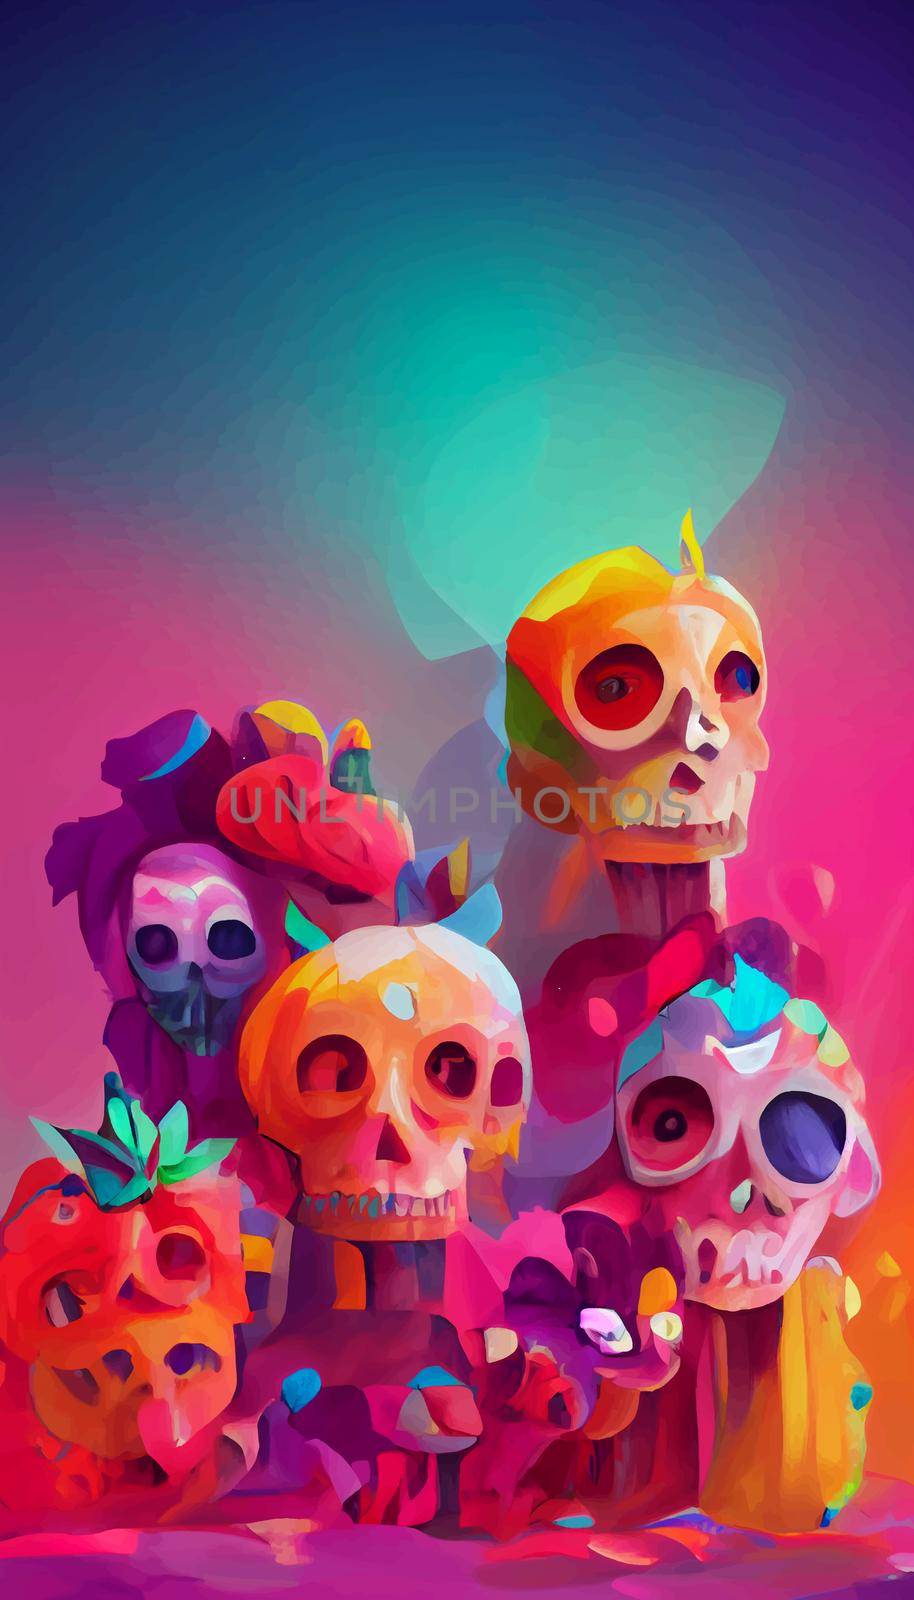 beautiful illustration of the Day of the Dead. typical altar of the day of the dead. Remembrance Day. by JpRamos